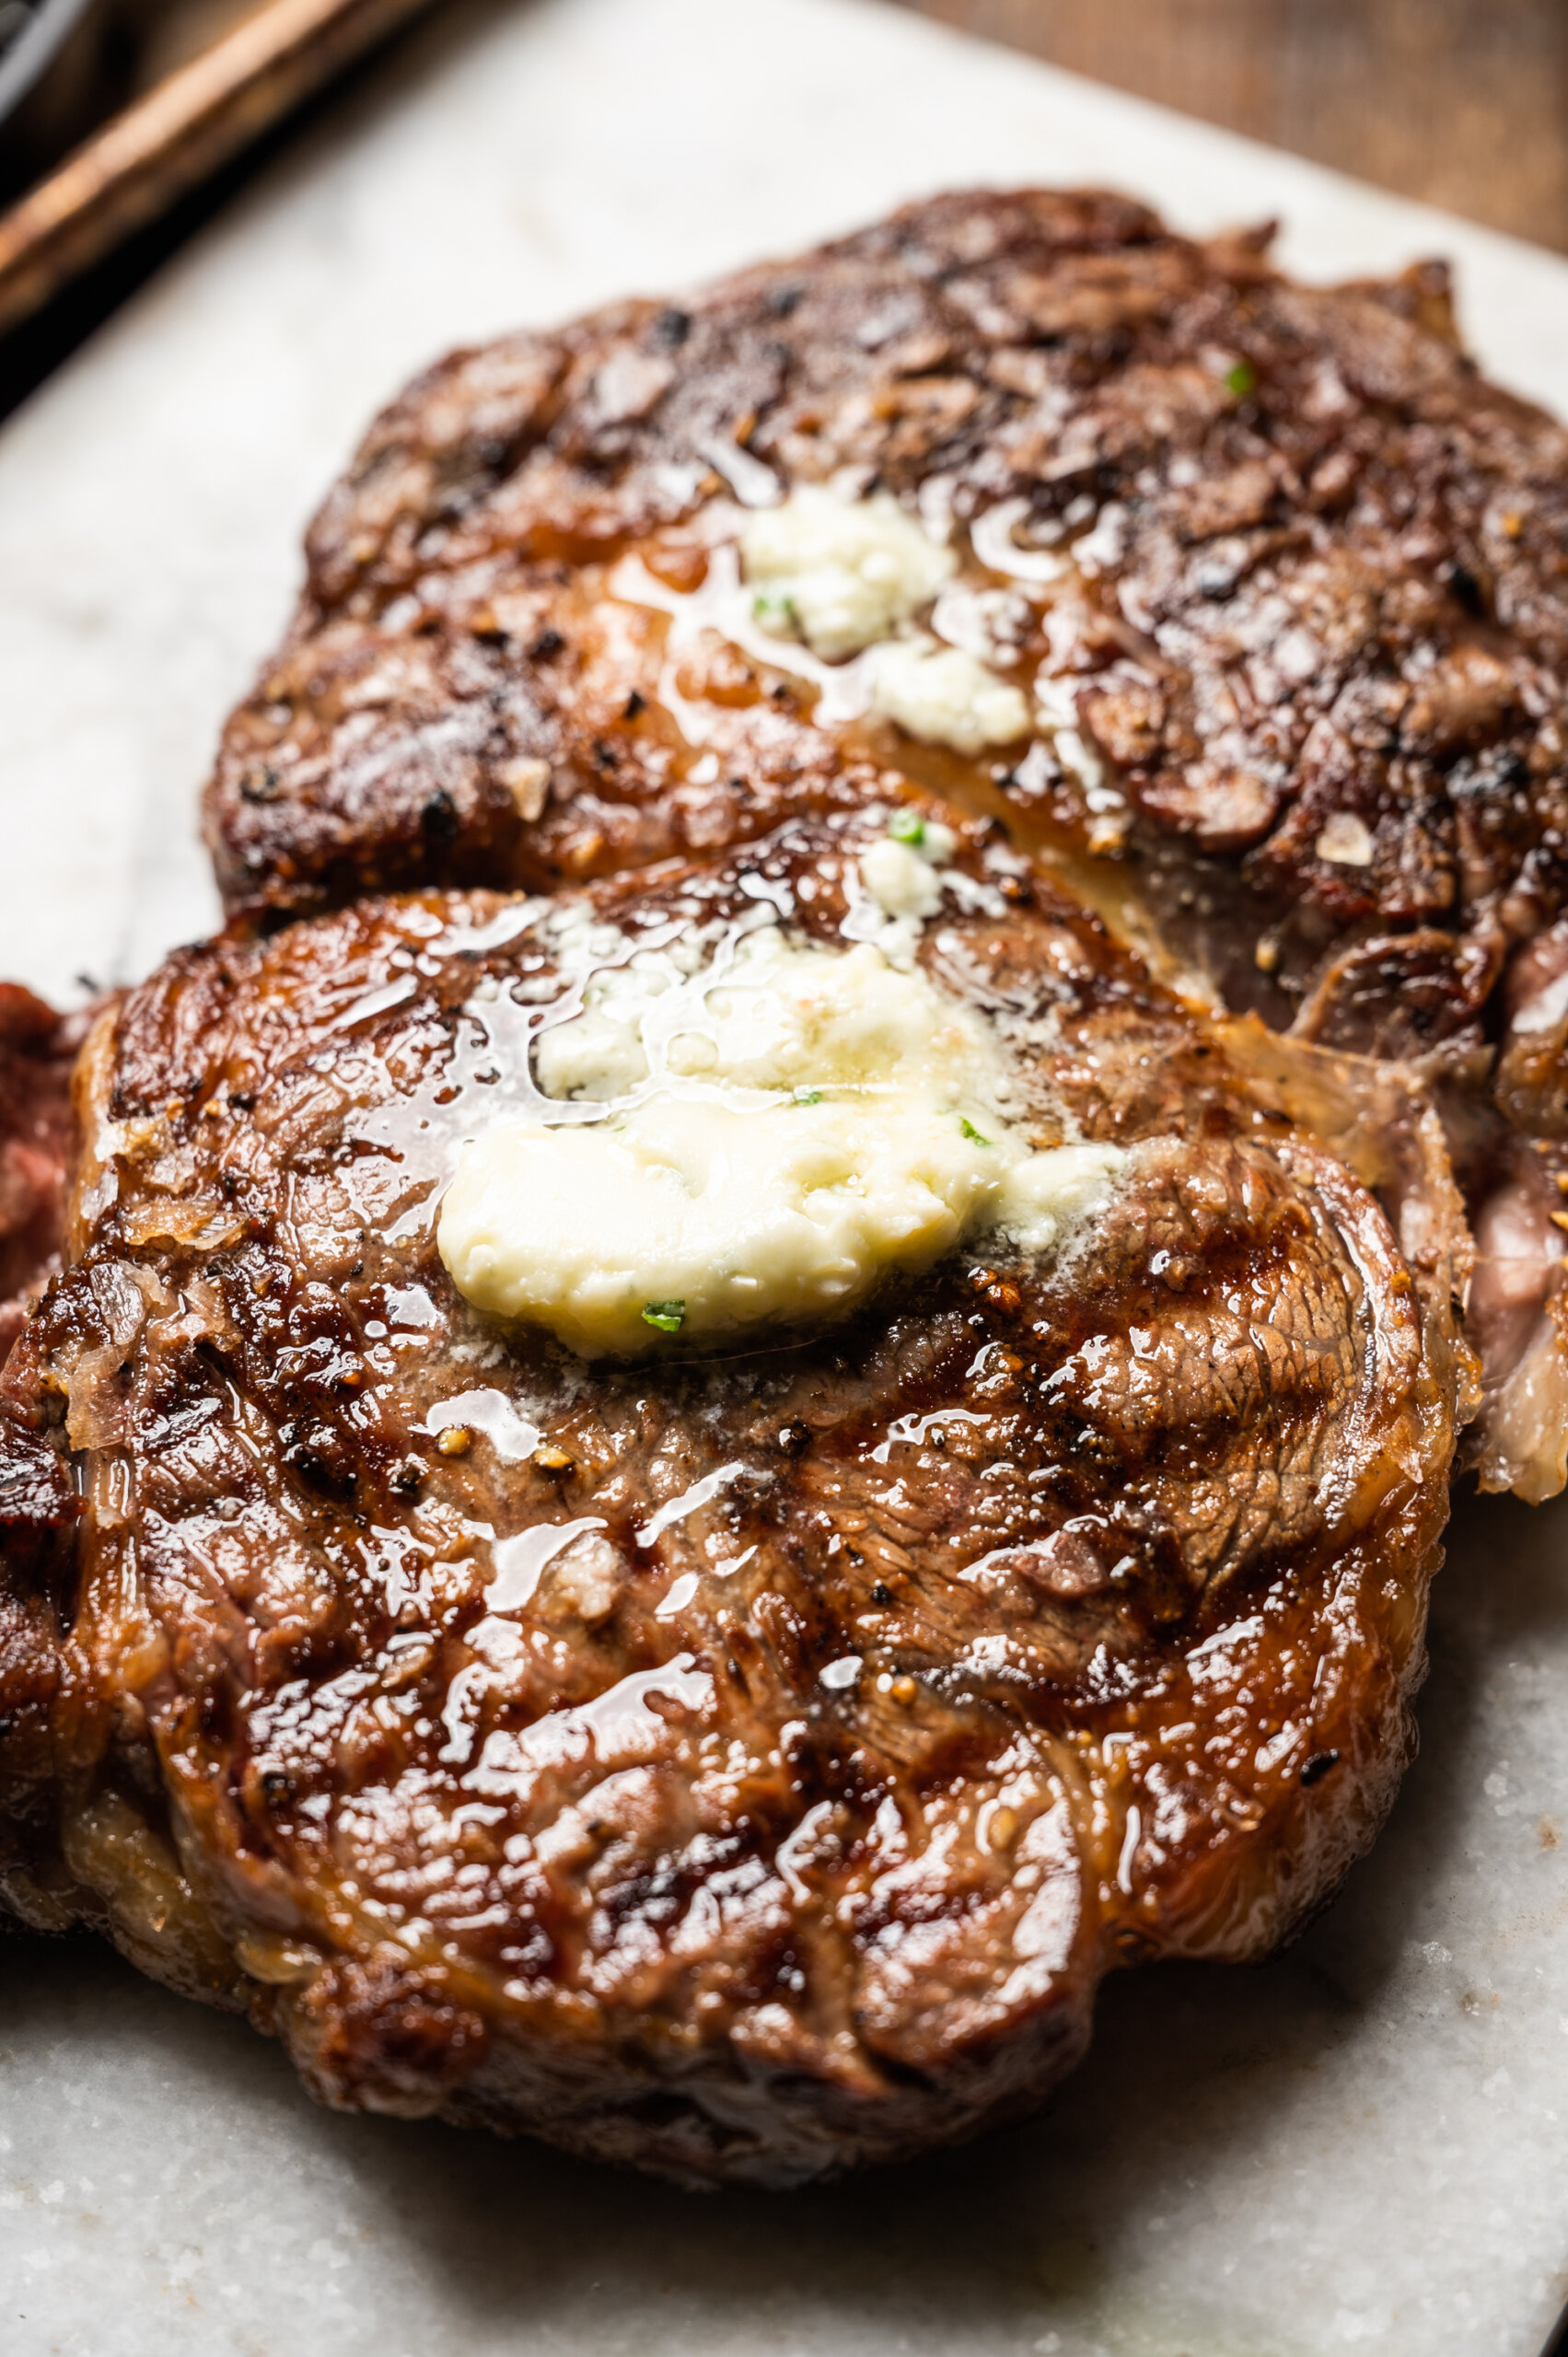 Grilled ribeye steak with melted bleu cheese butter